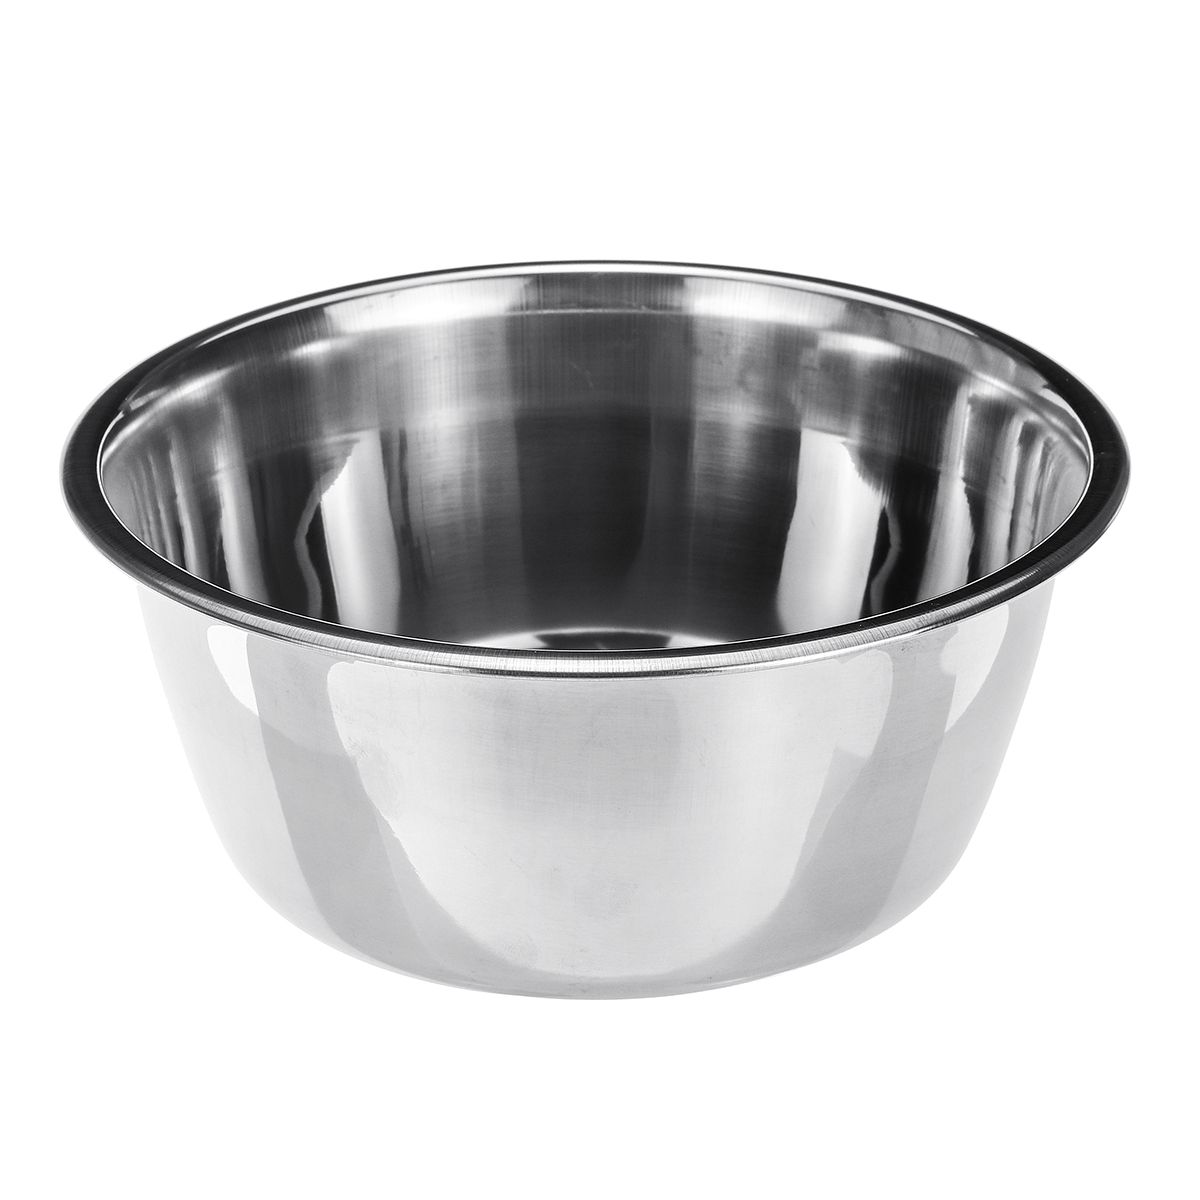 Elevated-Pet-Dog-Cat-Puppy-Dish-Raised-Food-Feeder--Water-Bowl-Stainless-Steel-1563933